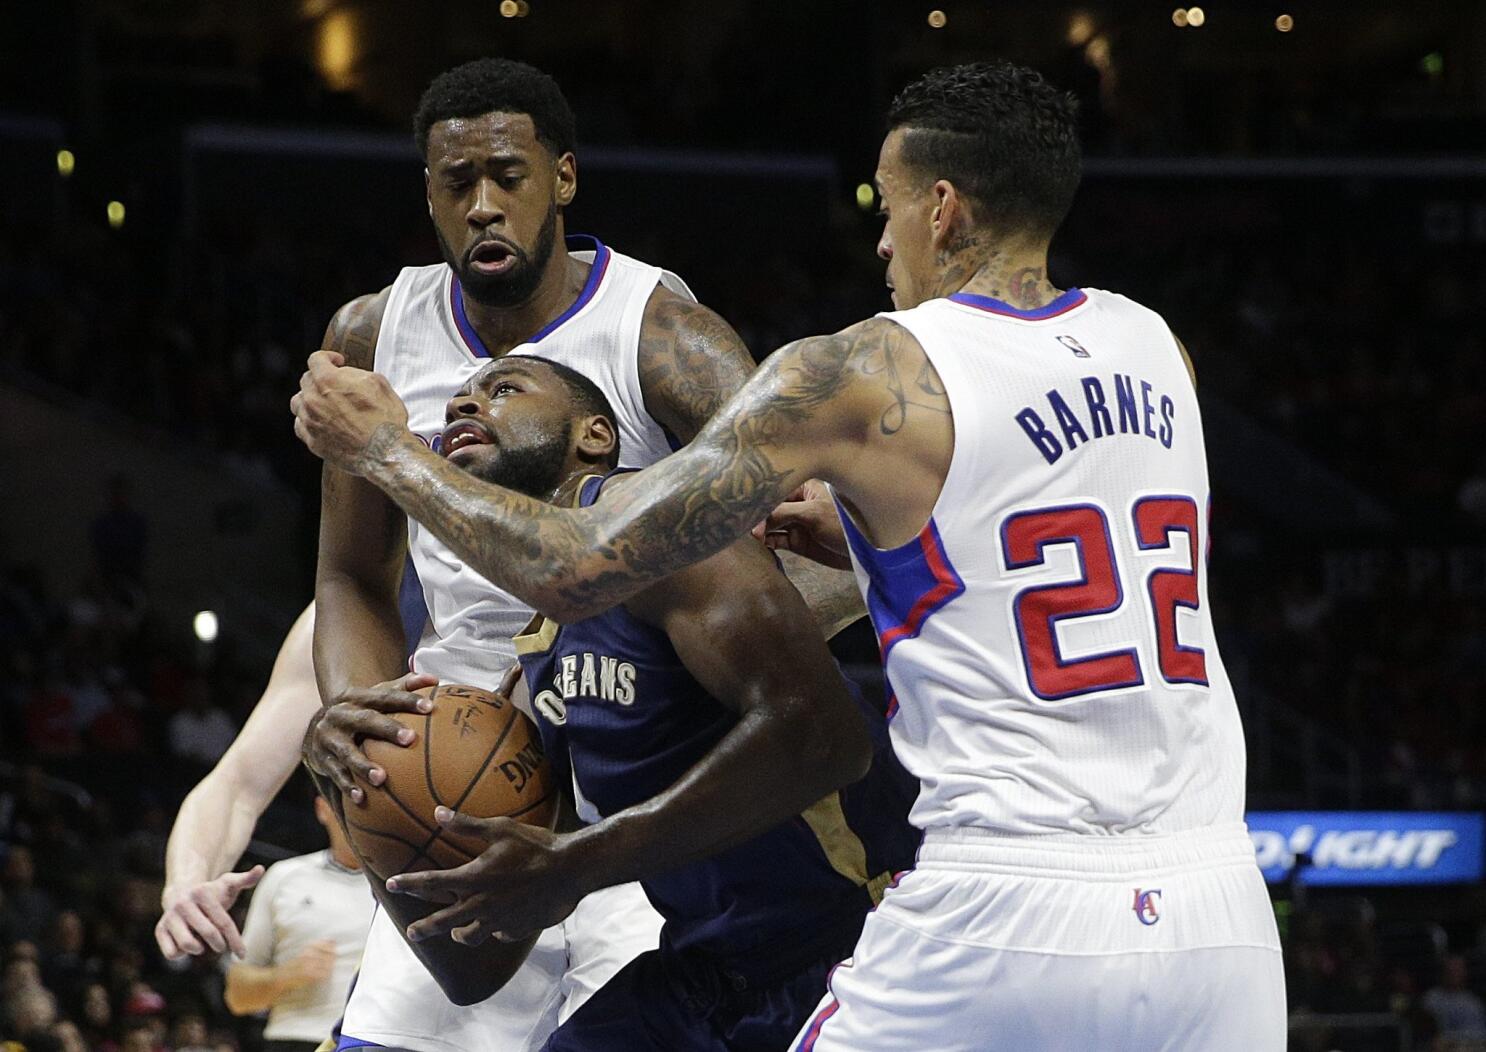 Clippers beat Brand, 76ers without Dunleavy - The San Diego Union